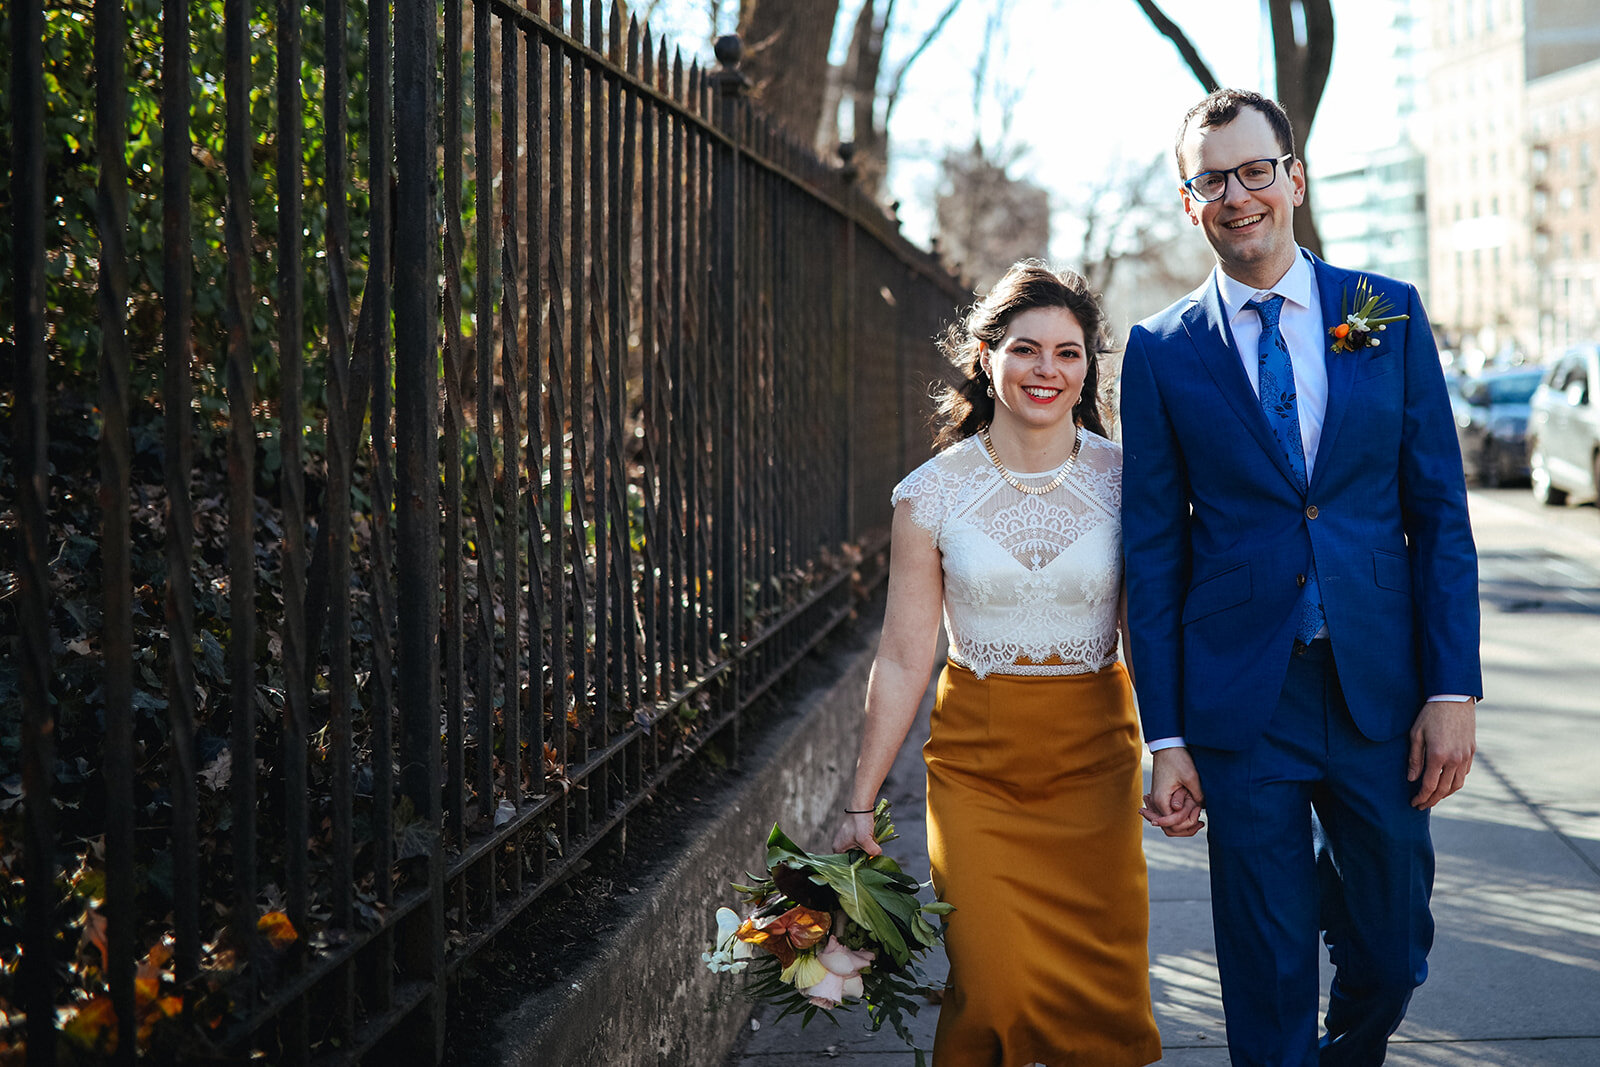 Future spouses walking hand in hand through New York City Shawnee Custalow queer wedding photography